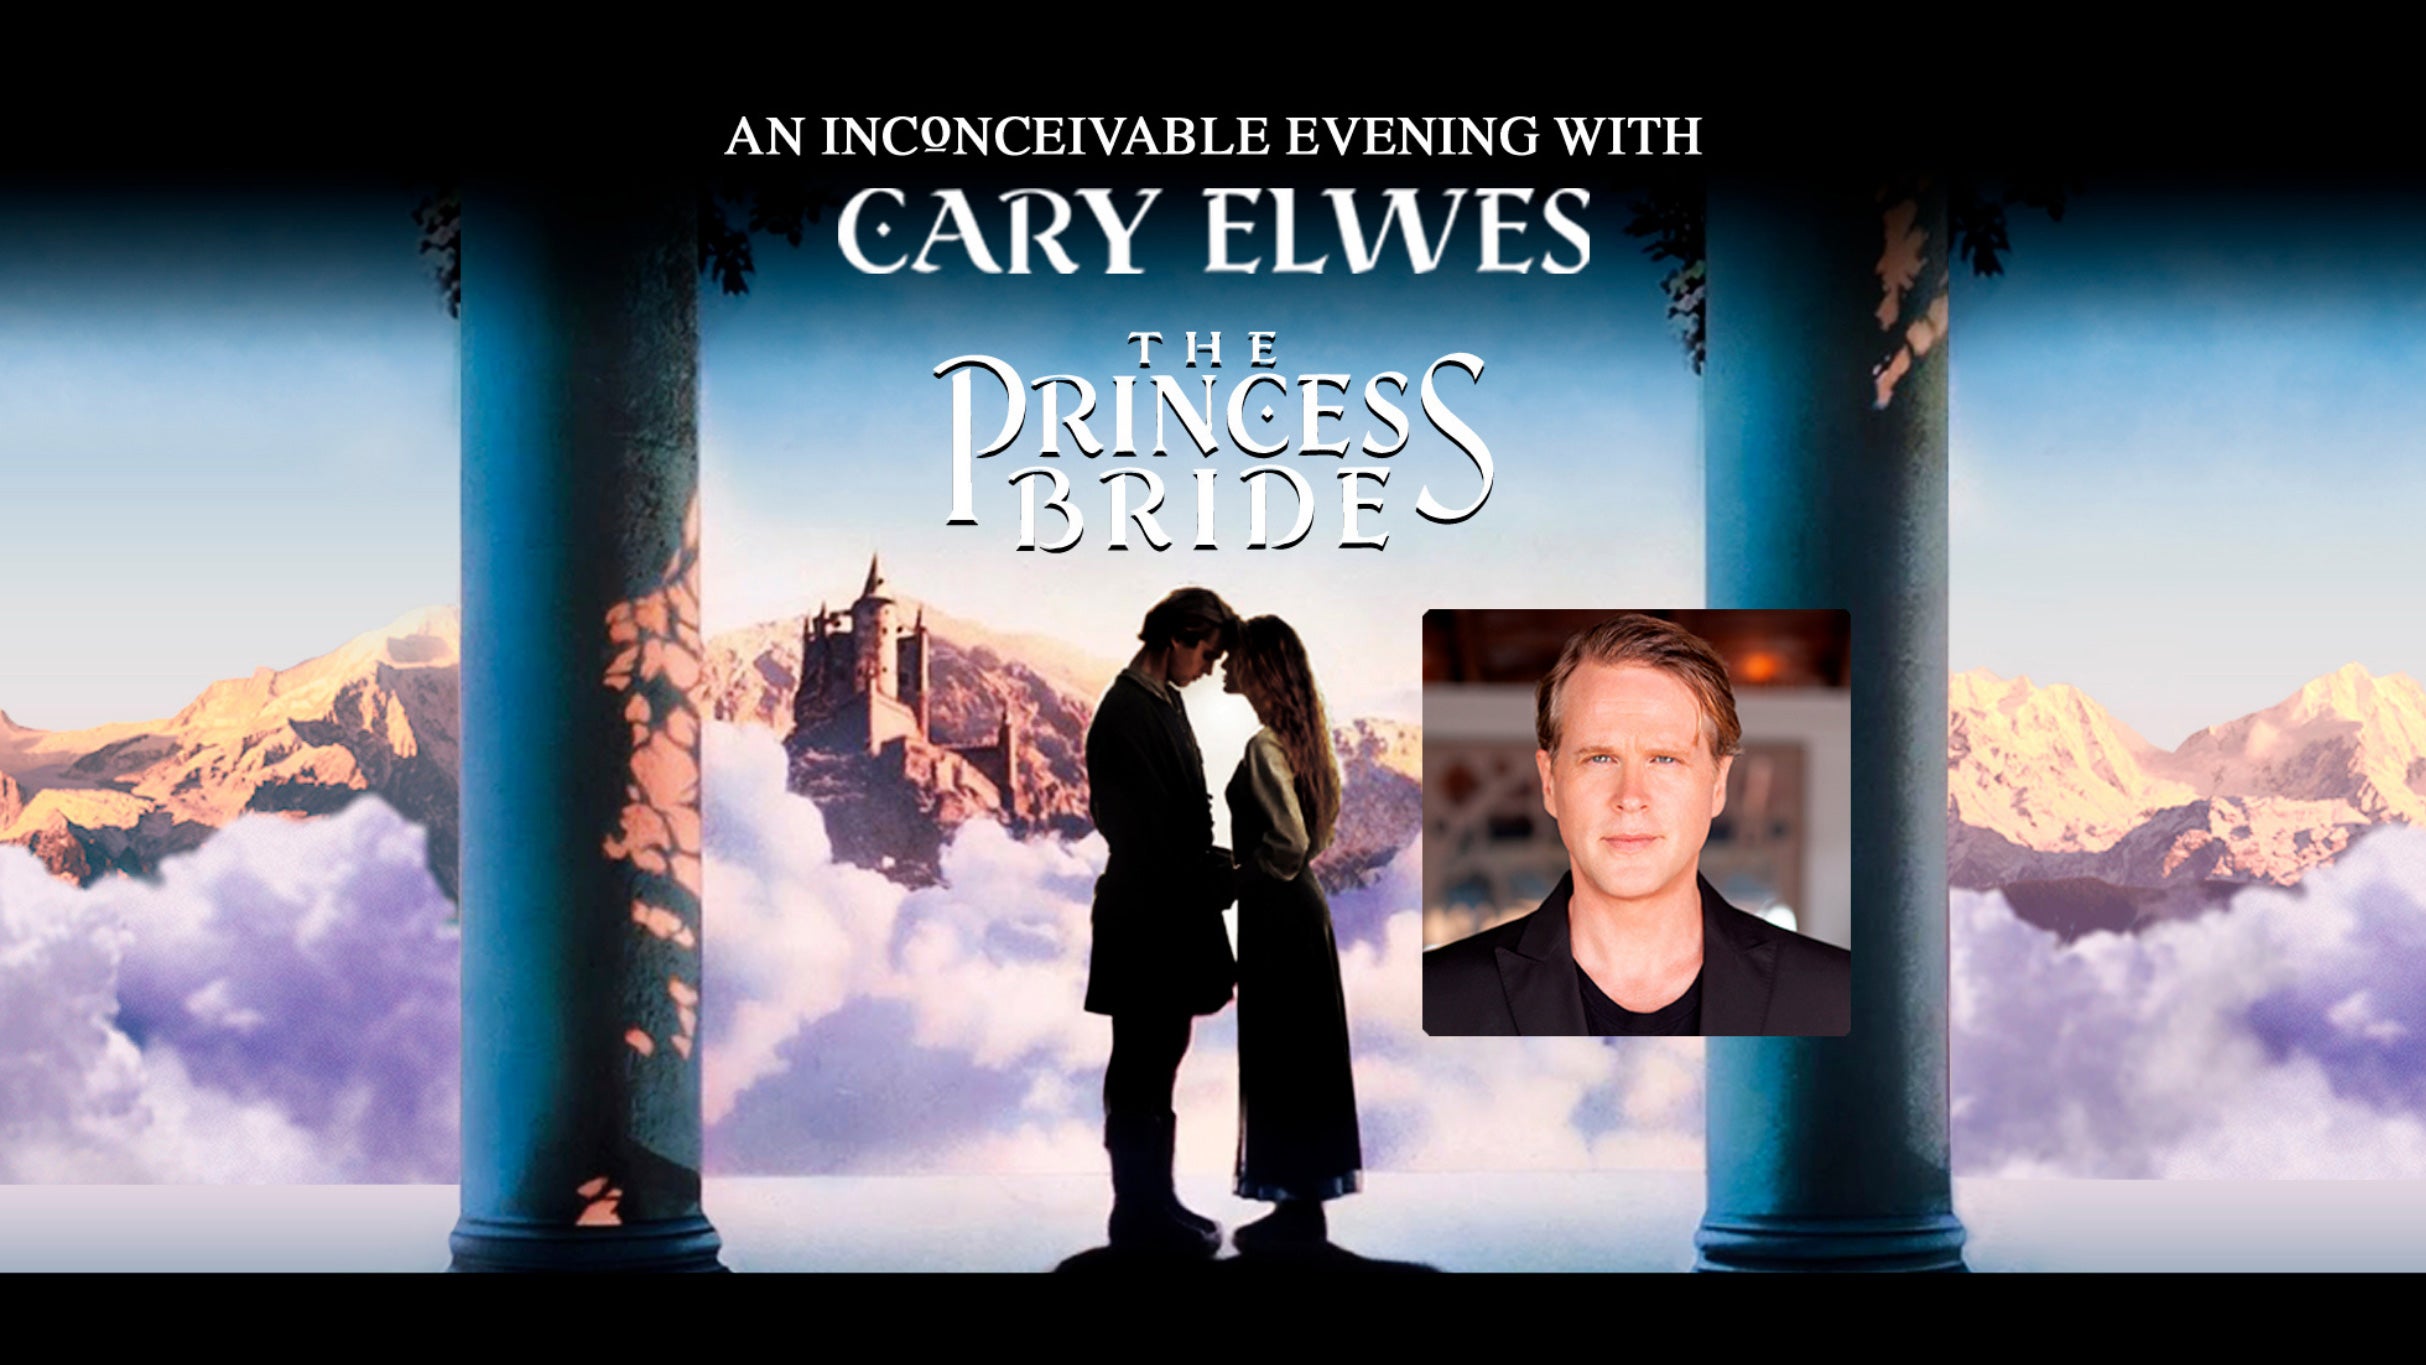 The Princess Bride: An Inconceivable Evening with Cary Elwes in Waukegan promo photo for Socail Media presale offer code